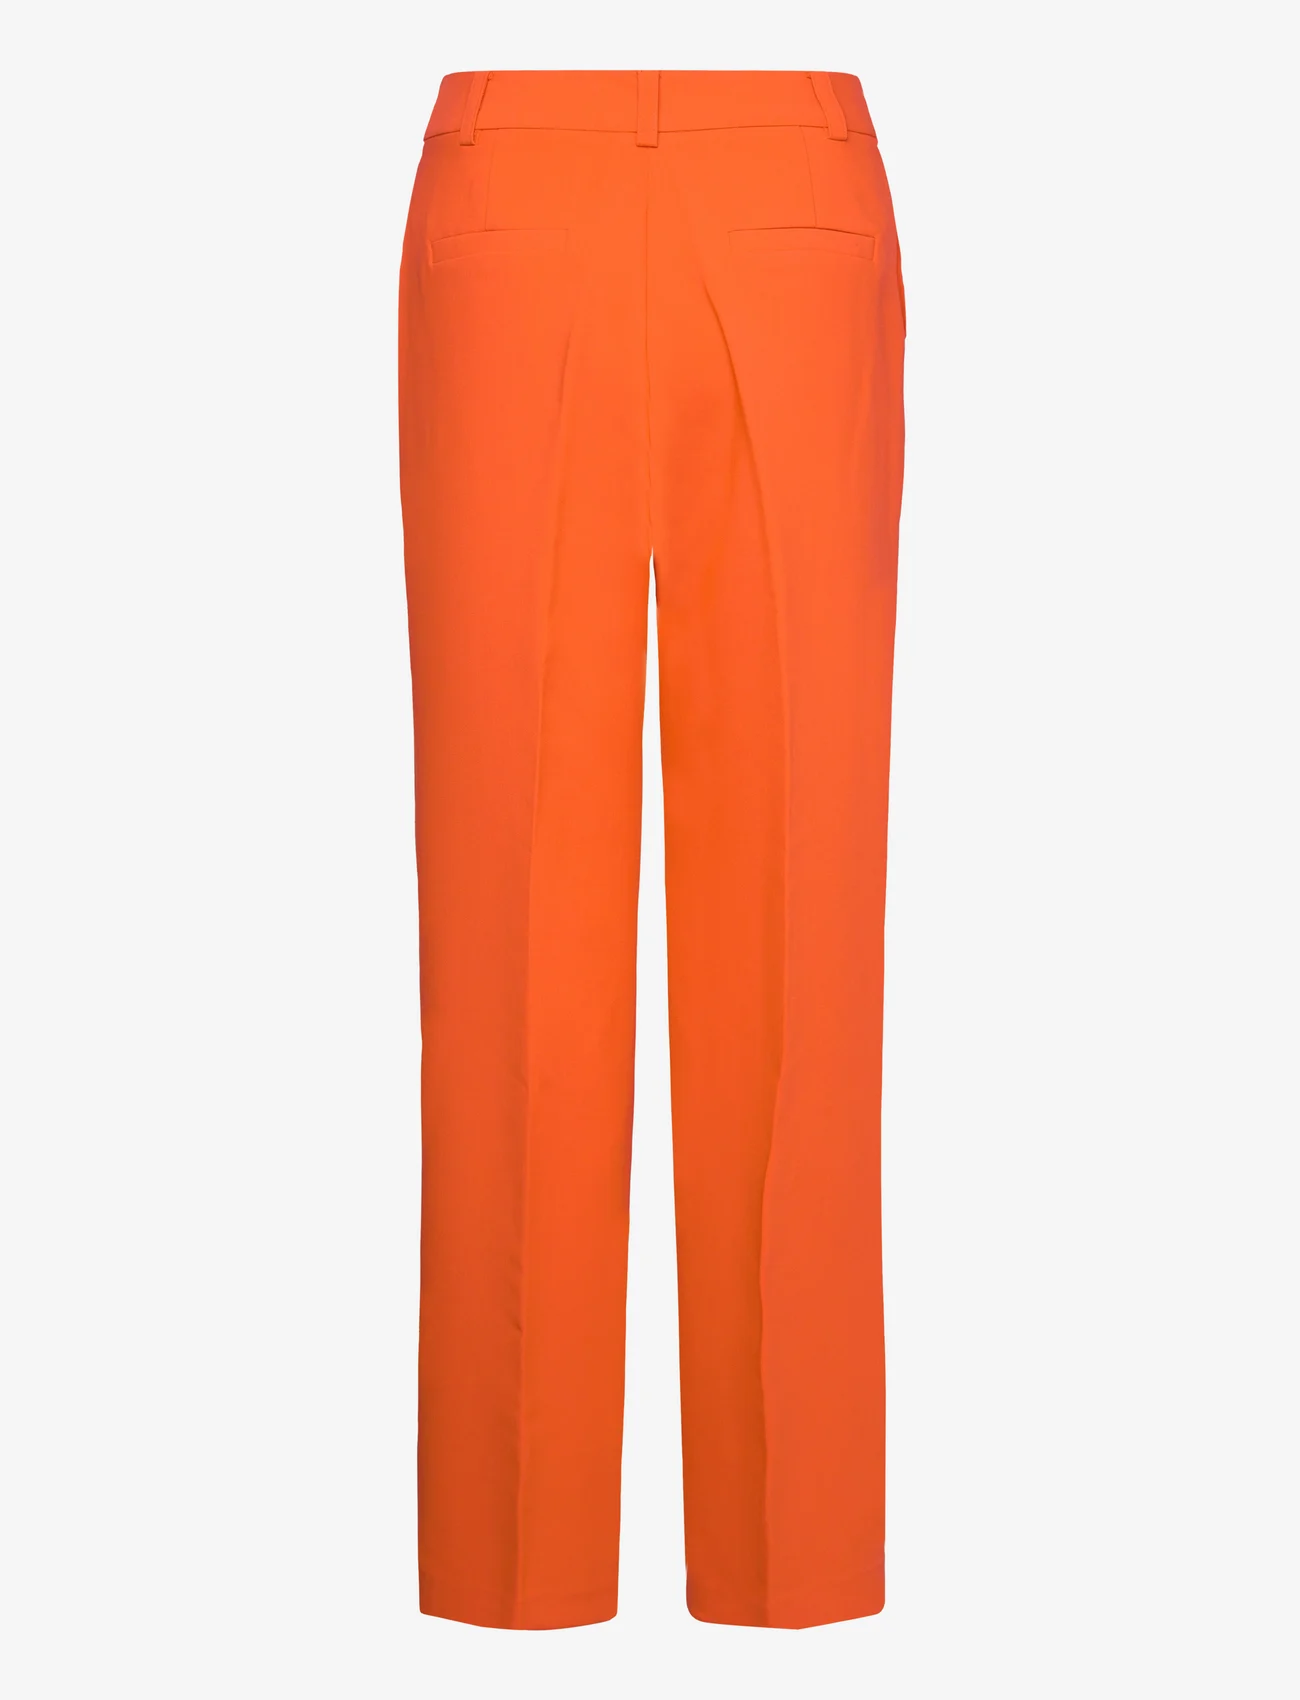 Modström - Gale pants - peoriided outlet-hindadega - bright cherry - 1